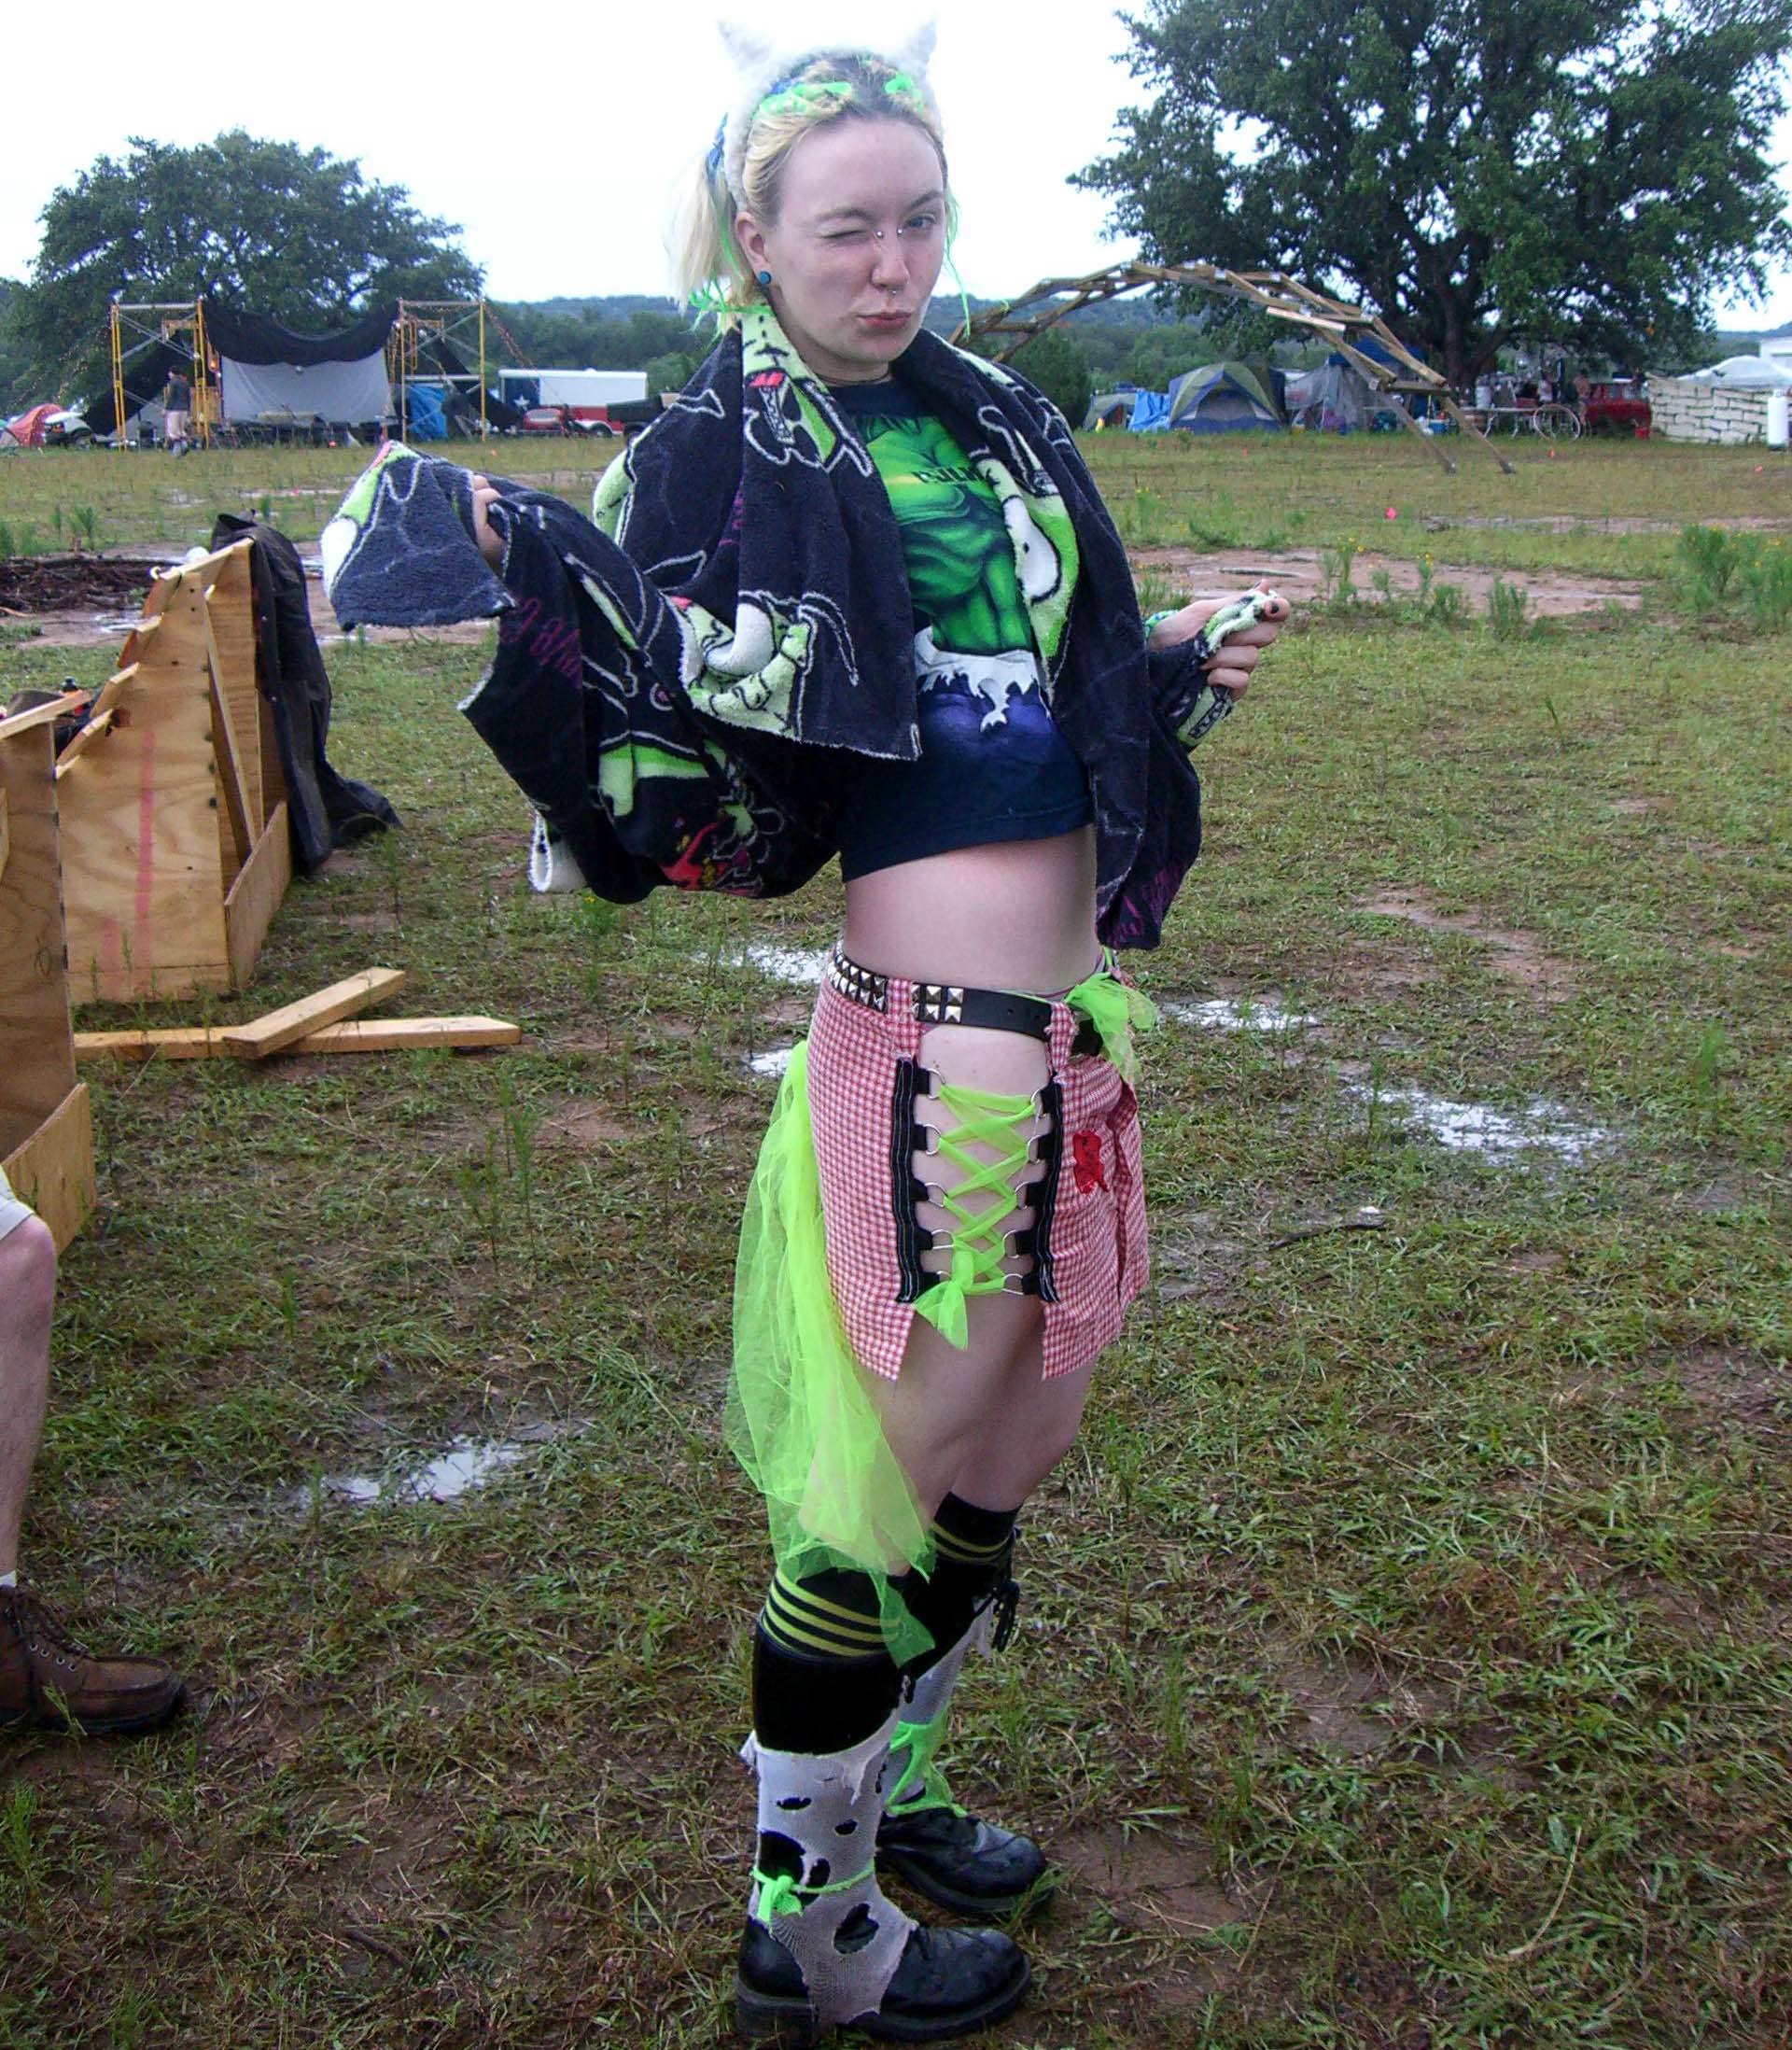 A black, green and red costume at Burning Flipside 2007